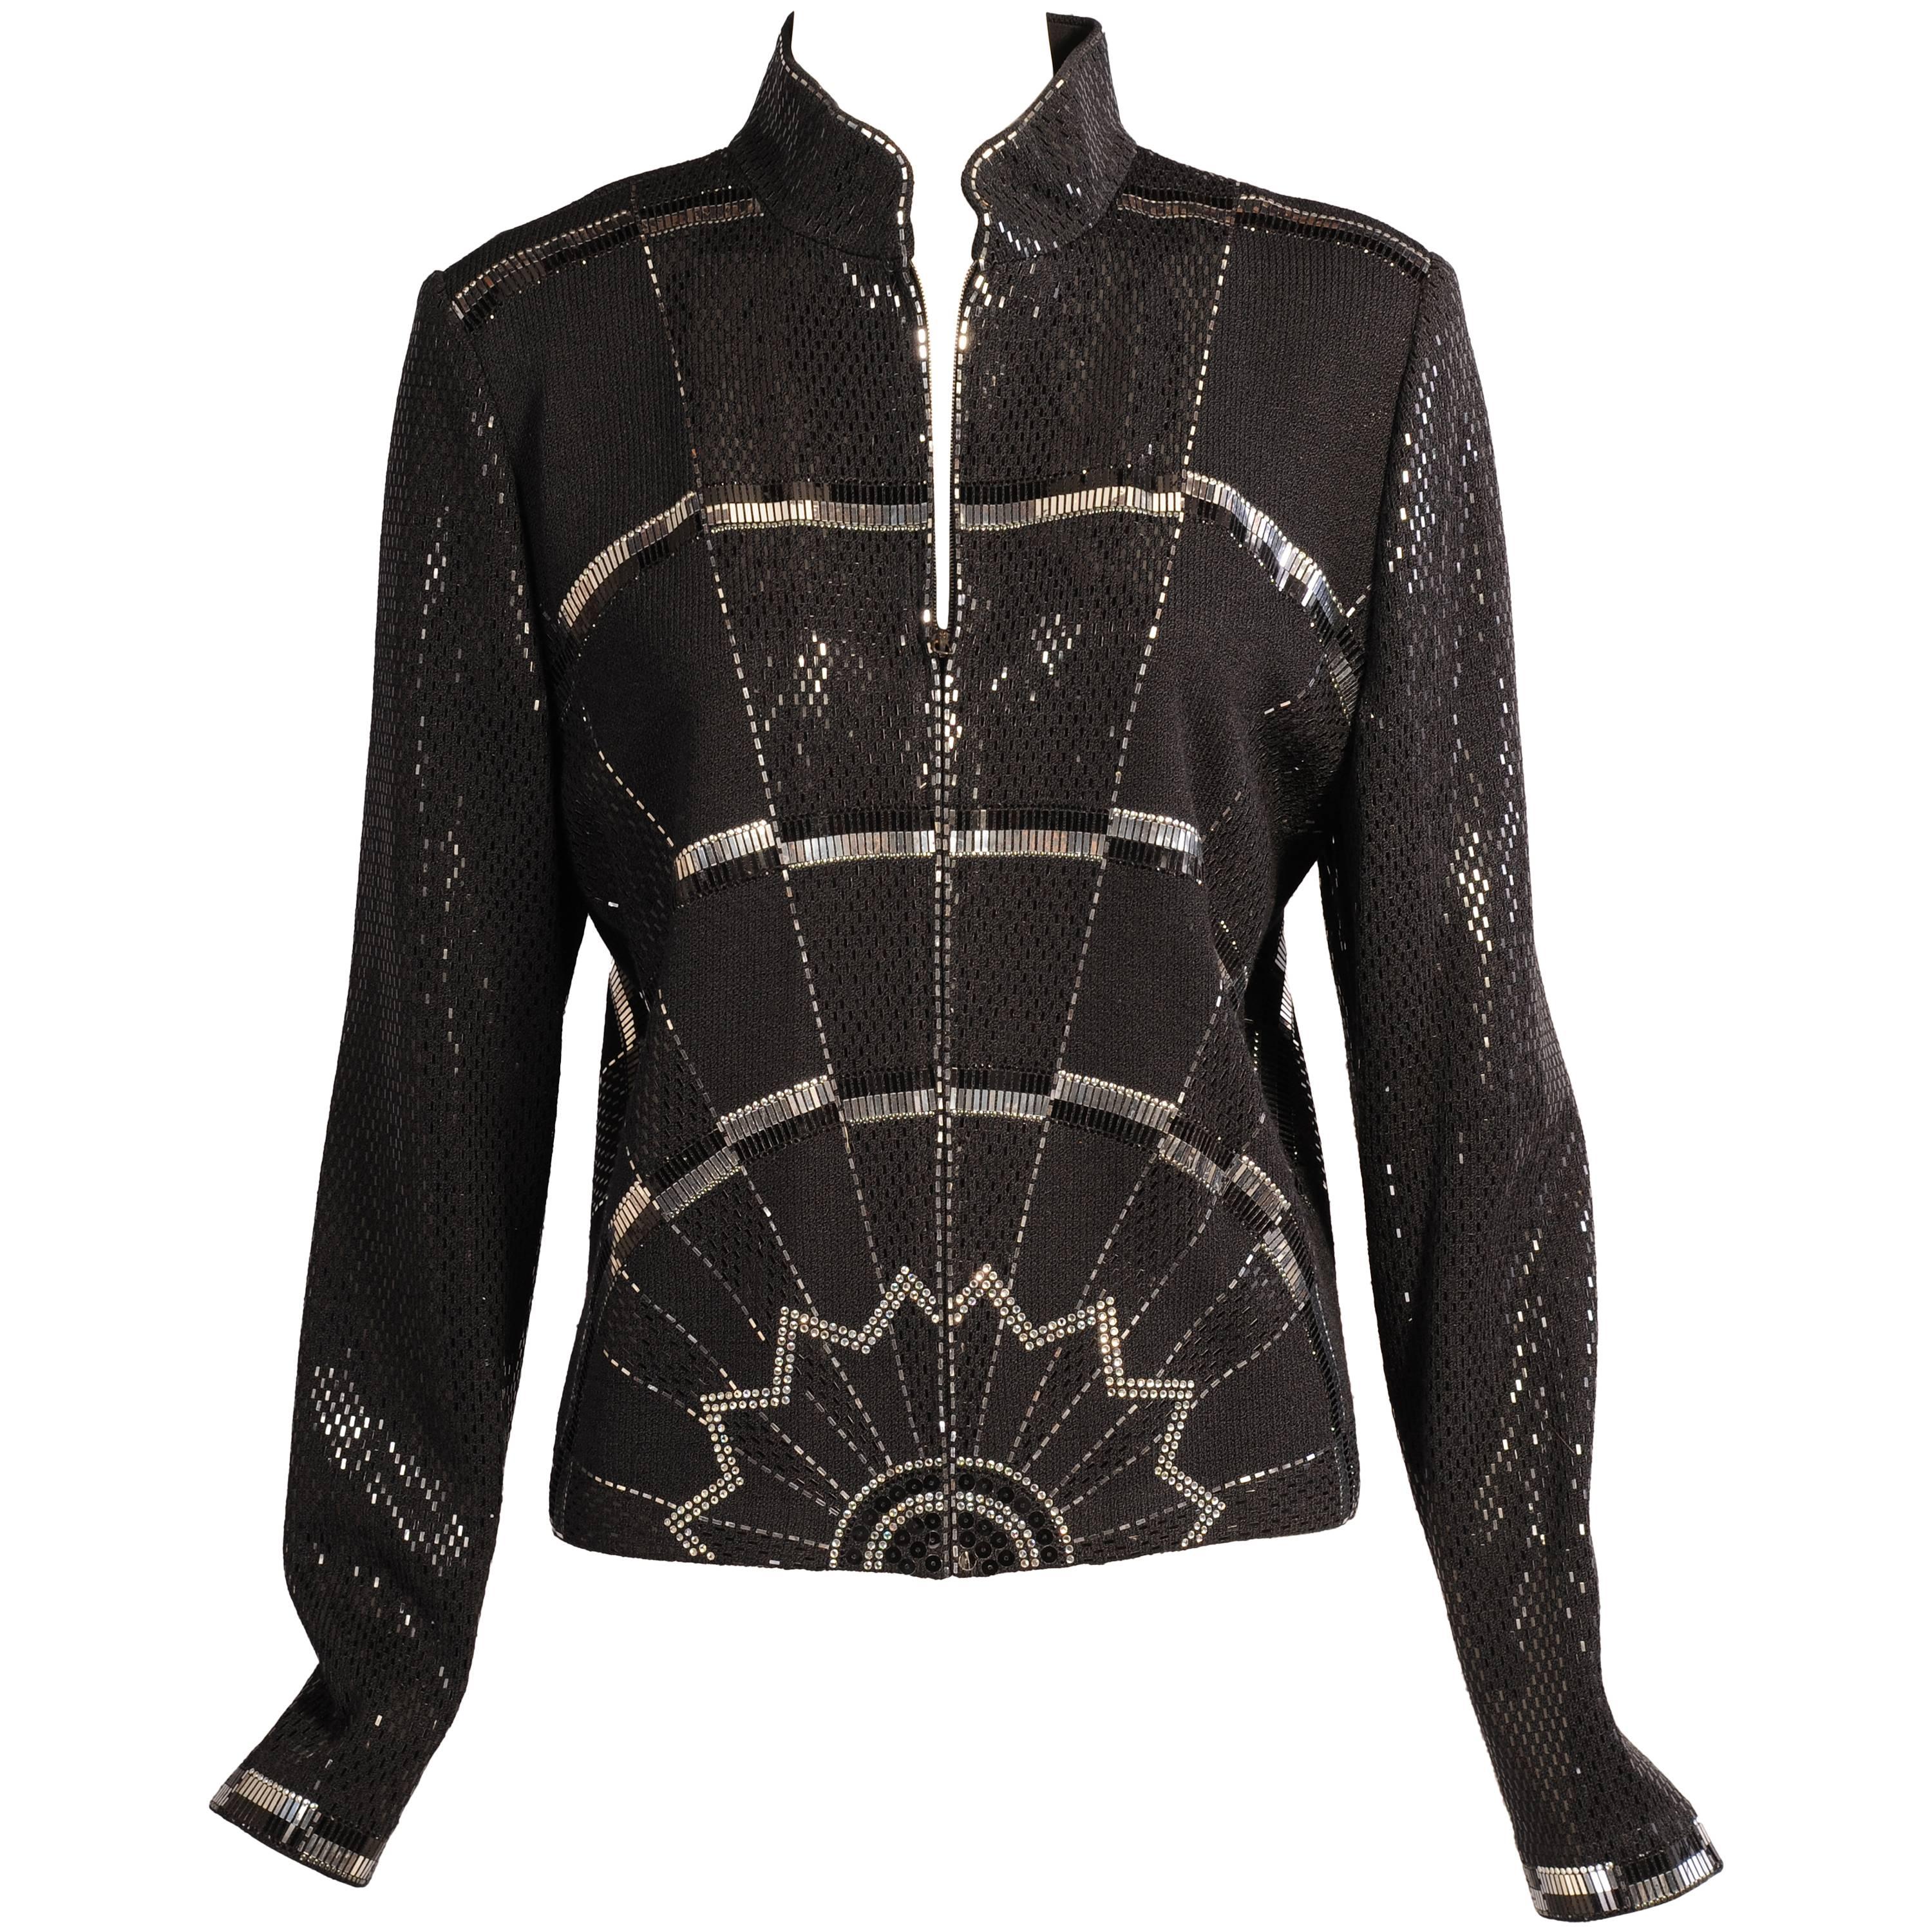 St. John Black Wool Jacket with Art Deco Inspired Silver and Black Decoration